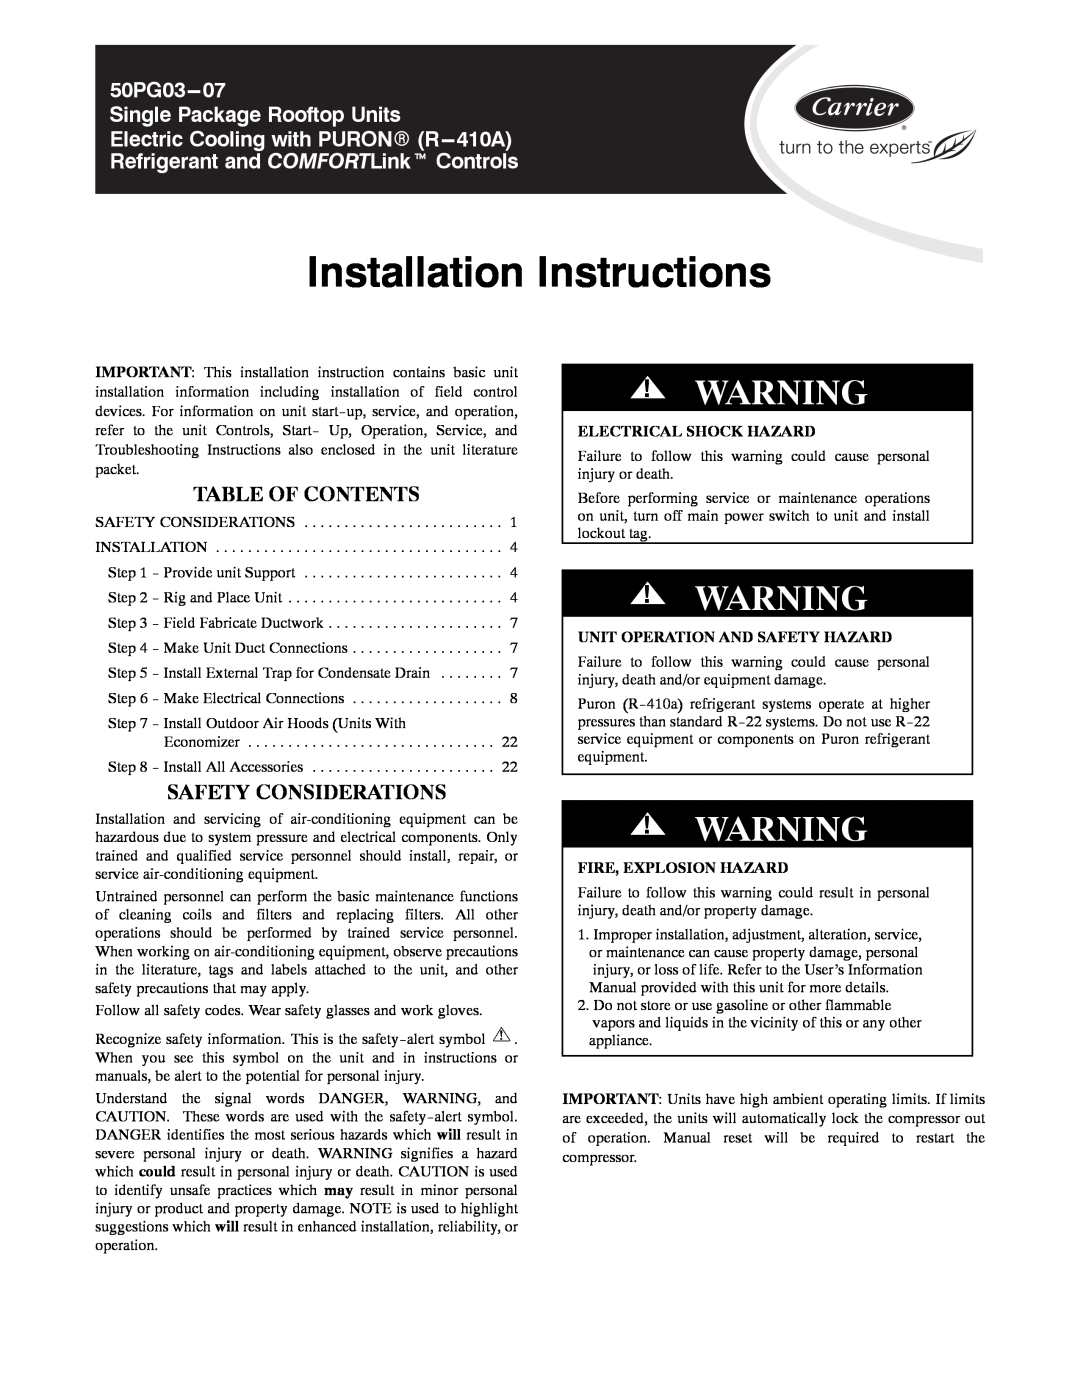 Carrier 50PG03-07 installation instructions Table Of Contents, Safety Considerations, Electrical Shock Hazard 